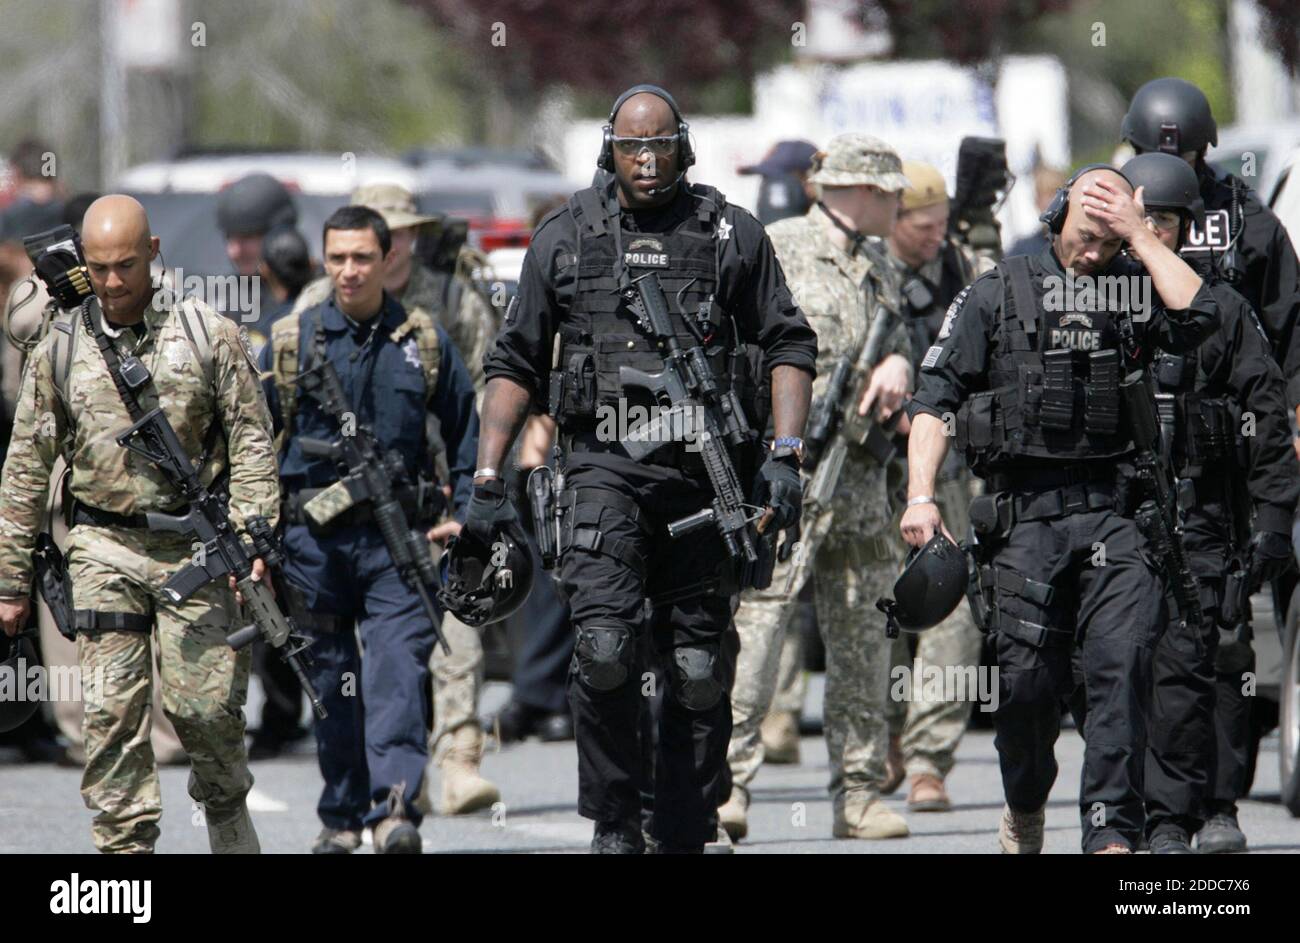 NO FILM, NO VIDEO, NO TV, NO DOCUMENTARY - A SWAT team from the Oakland Police Department leaves the scene of a shooting at Oikos University on Edgewater Dr. in Oakland, Ca, USA on Monday, April 2, 2012. Photo by Gary Reyes/San Jose Mercury News/MCT/ABACAPRESS.COM Stock Photo